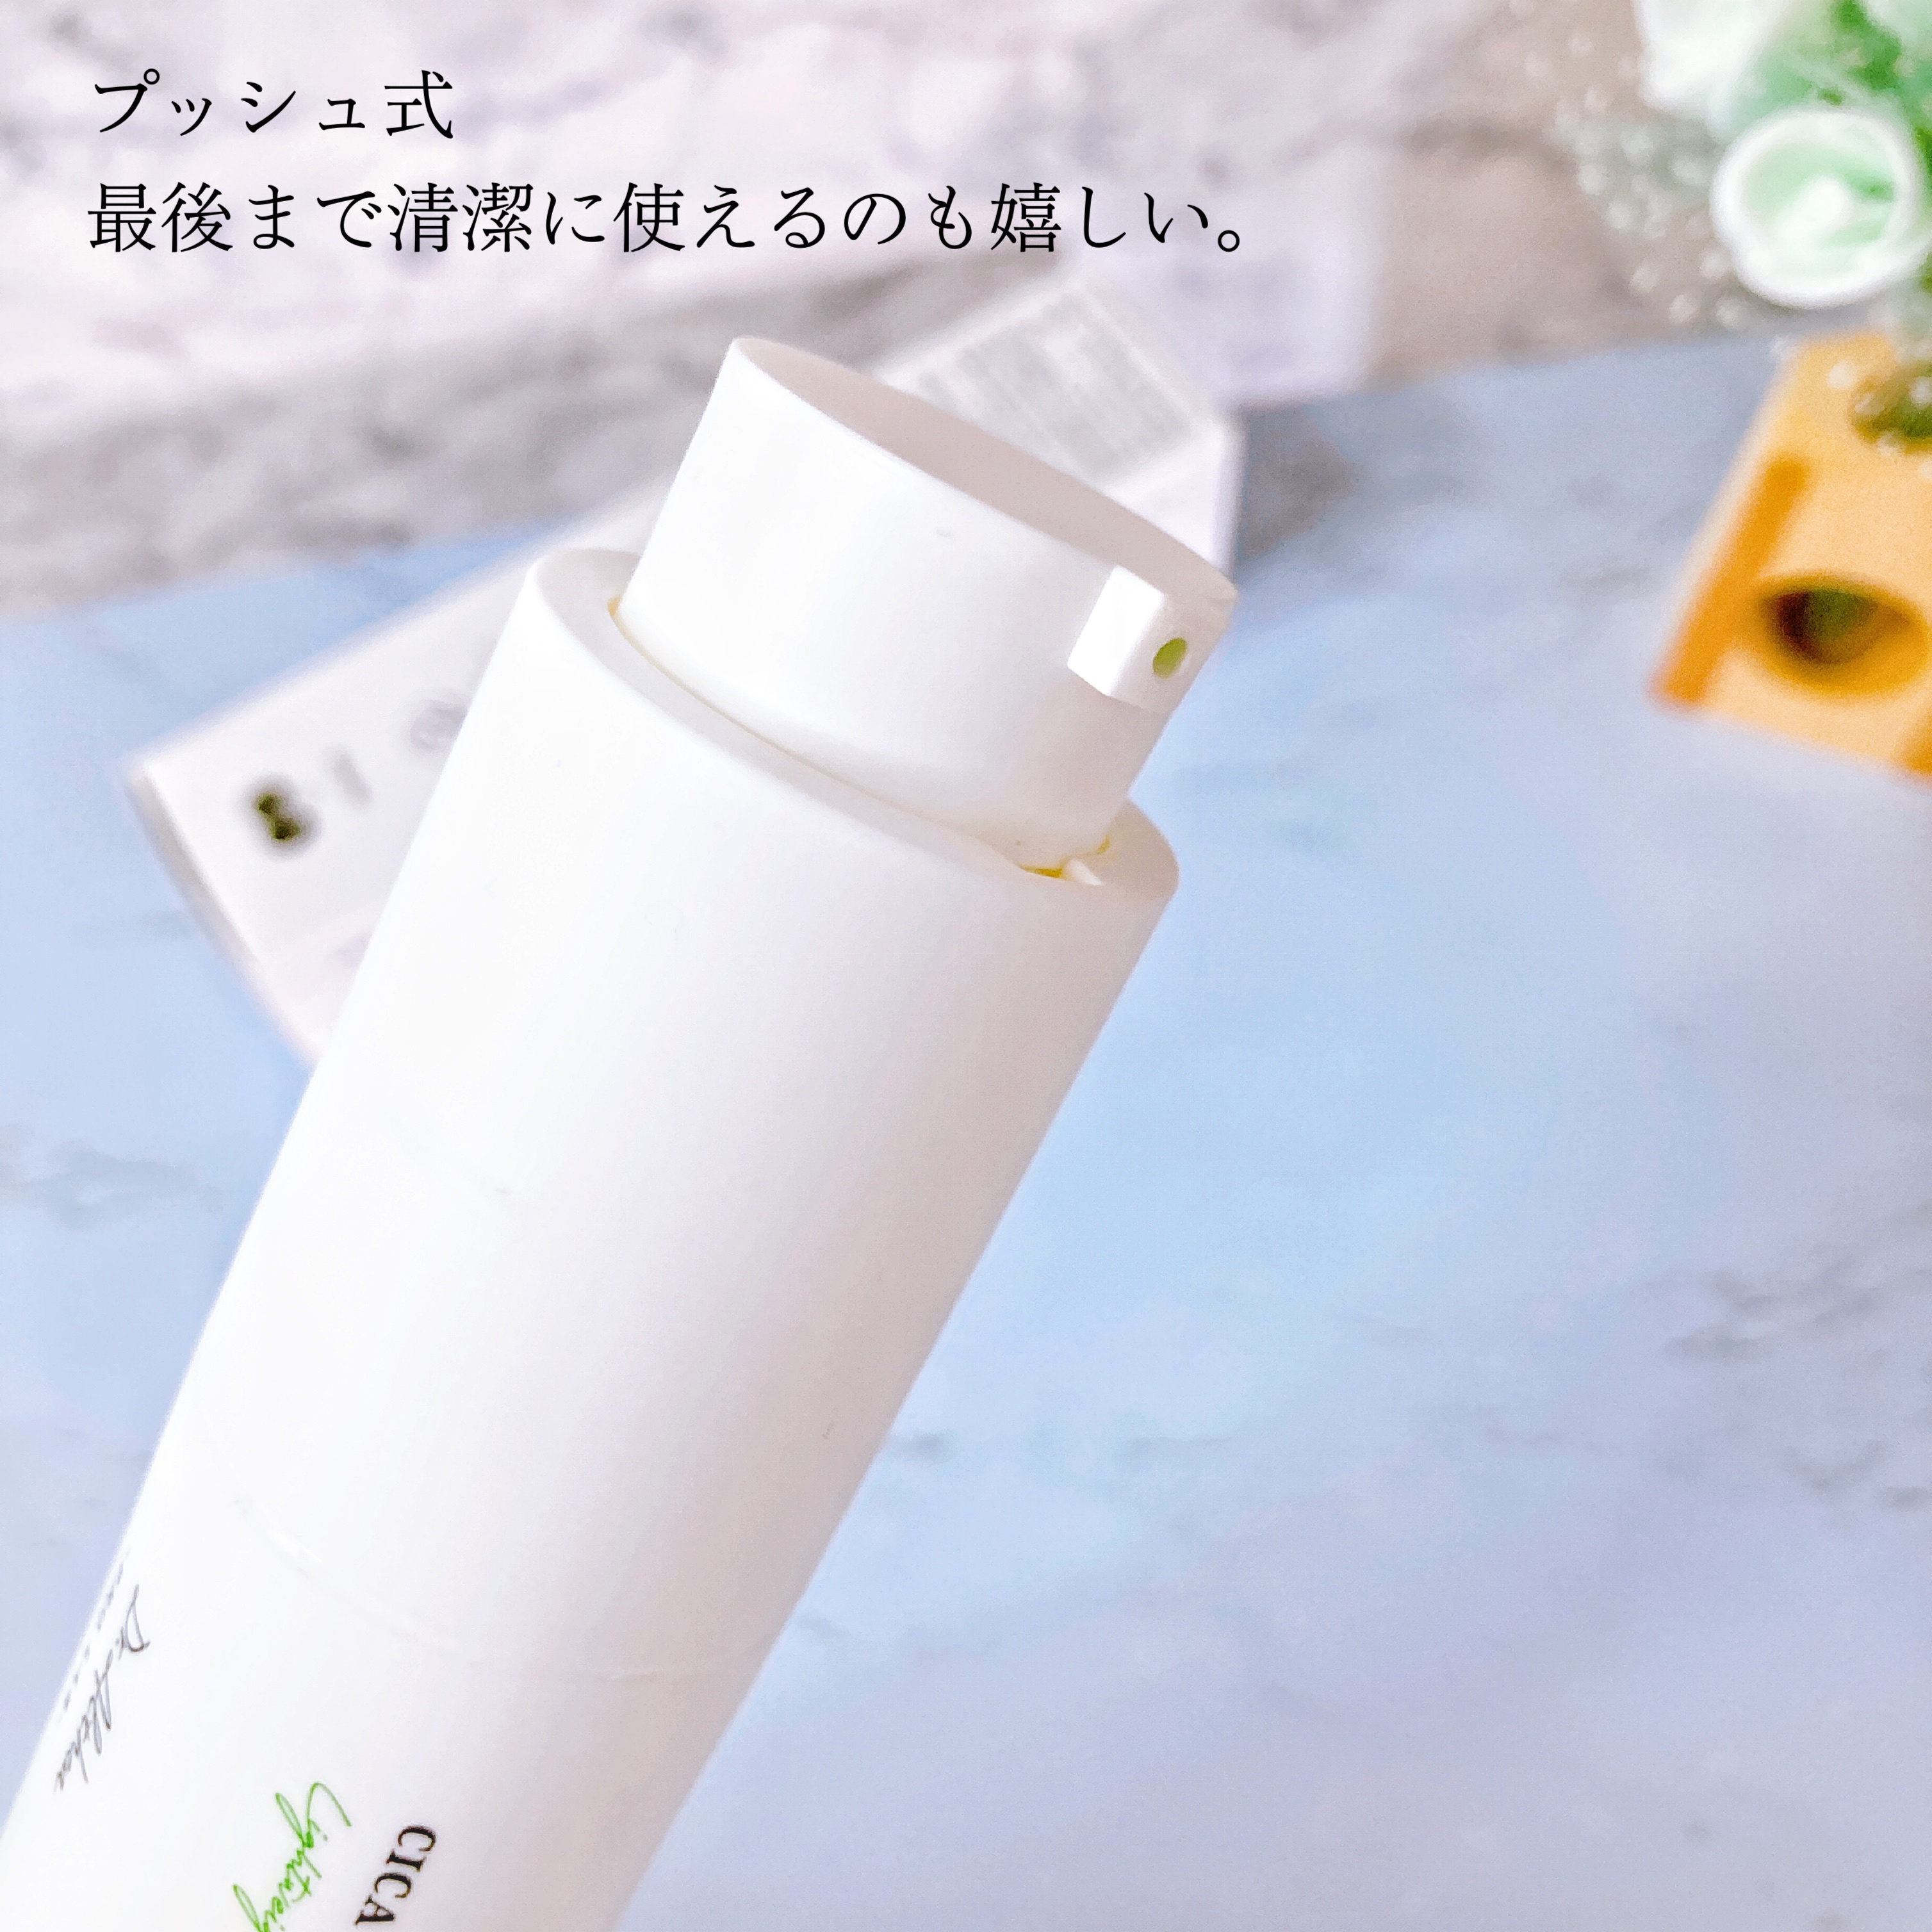 Dr.althea
CICA RELIEF SUN ESSENCEを使ったメグさんのクチコミ画像2